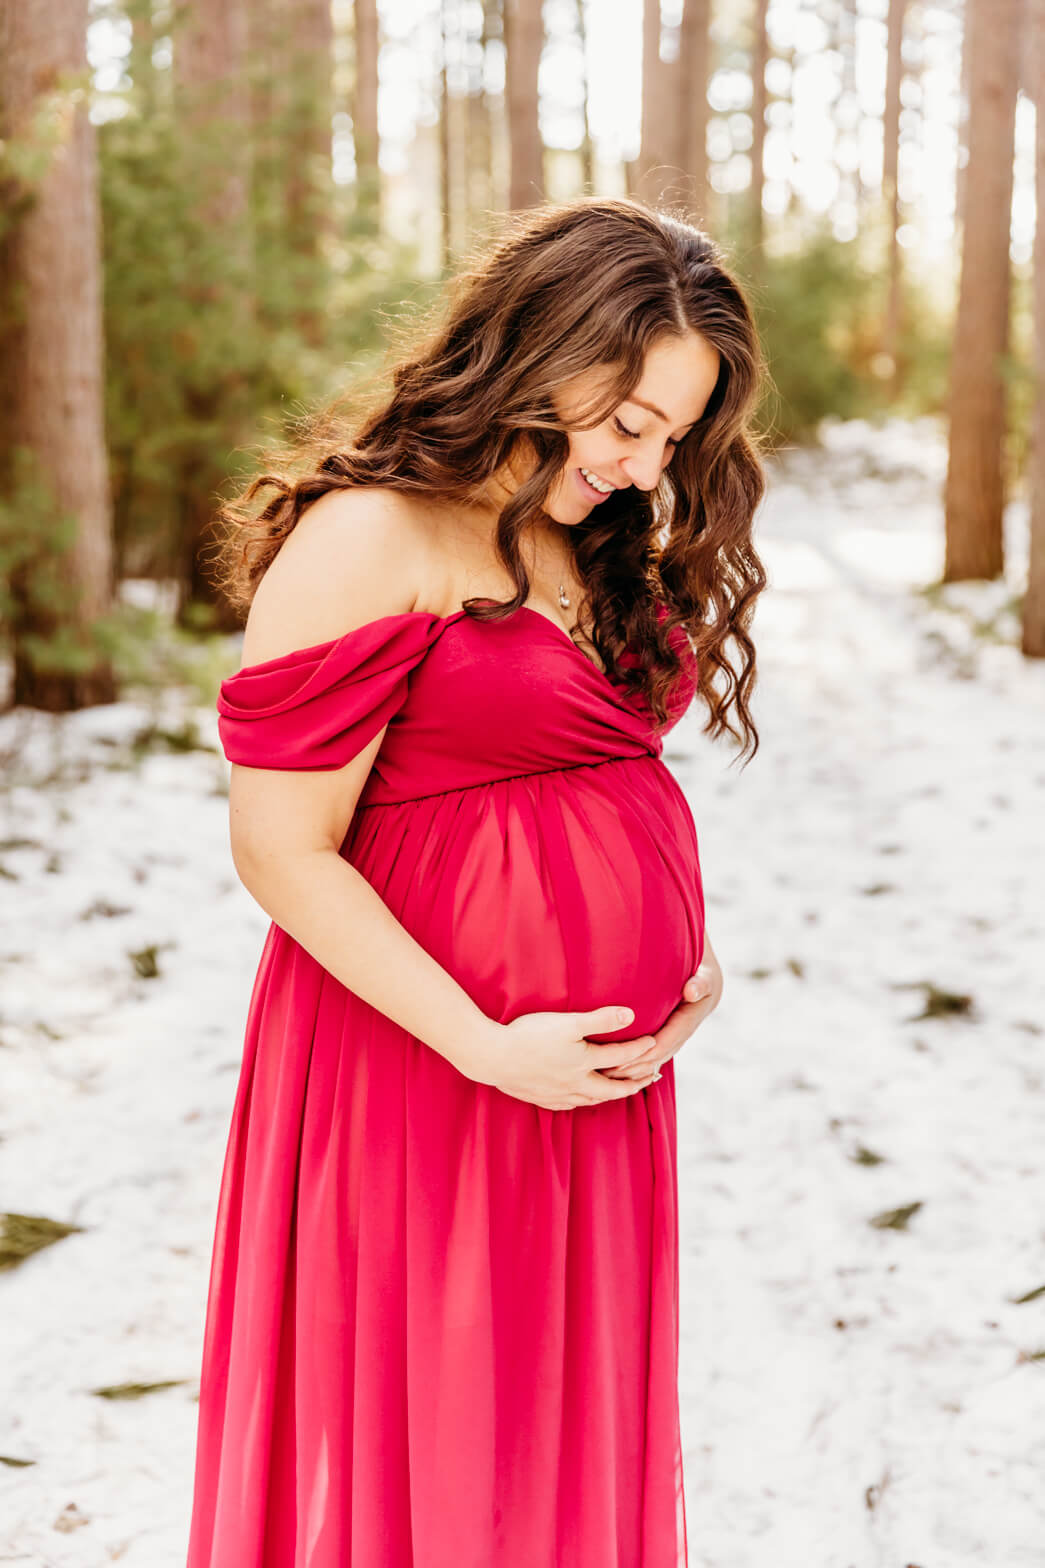 A mom to be looks down at her bump while standing in a snowy pine forest froedtert birth center